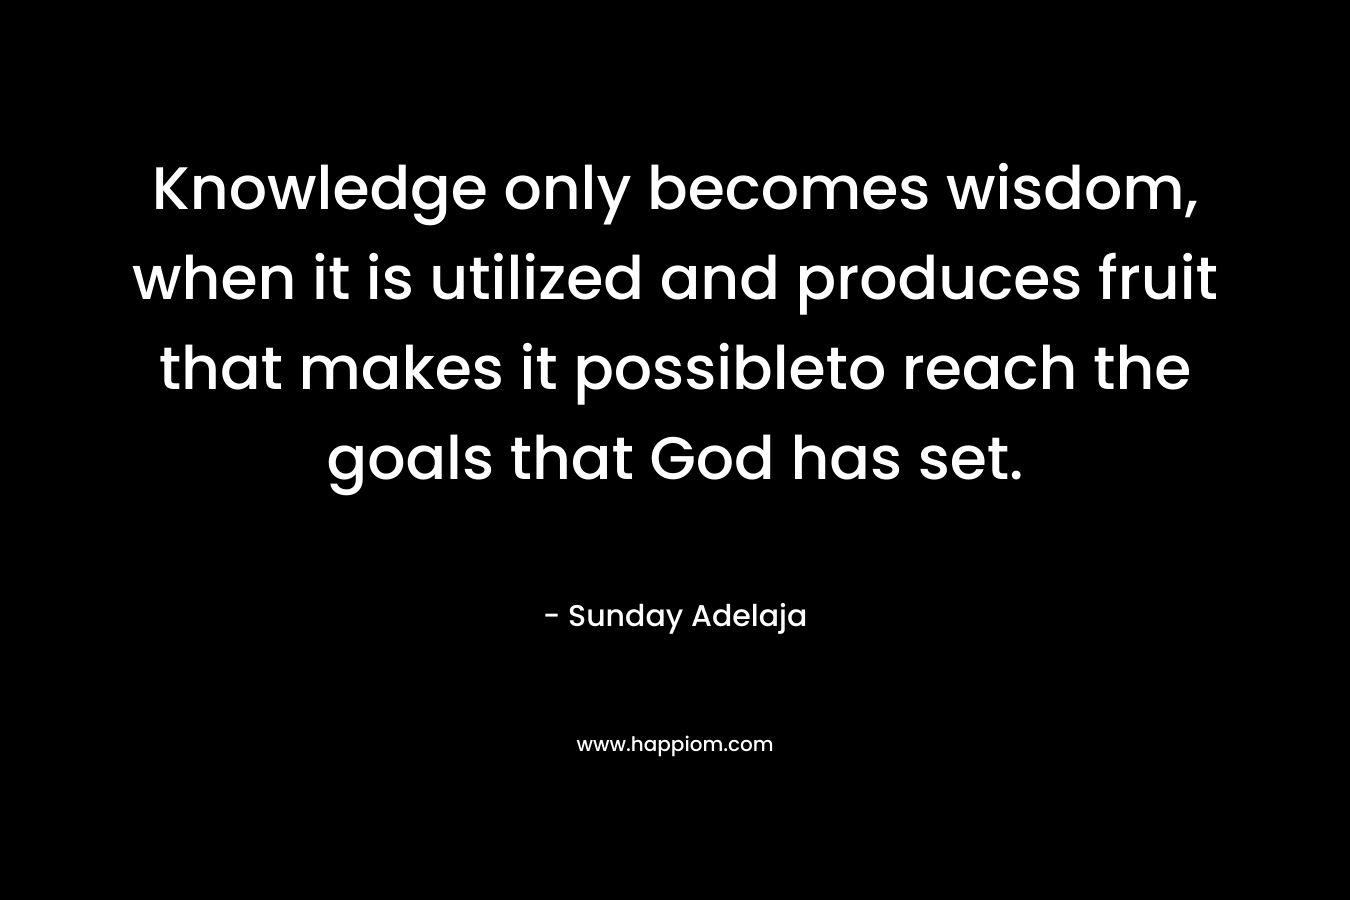 Knowledge only becomes wisdom, when it is utilized and produces fruit that makes it possibleto reach the goals that God has set. – Sunday Adelaja